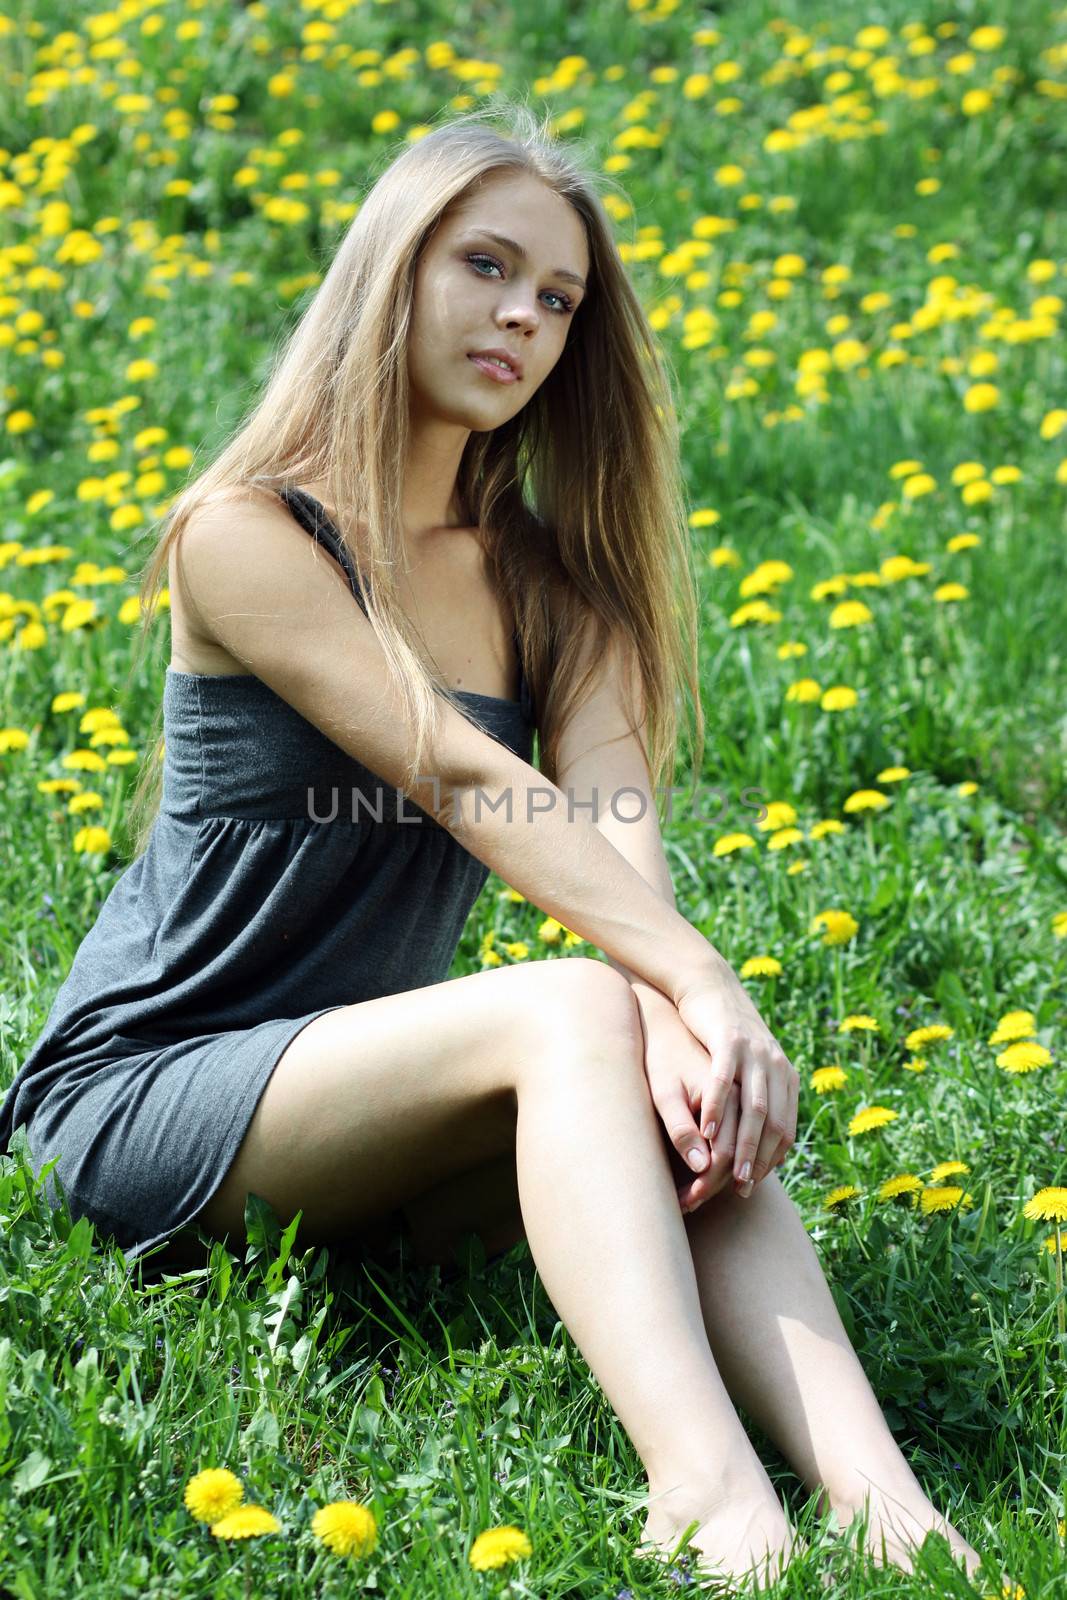 Beautiful young woman relaxing in the grass by andersonrise